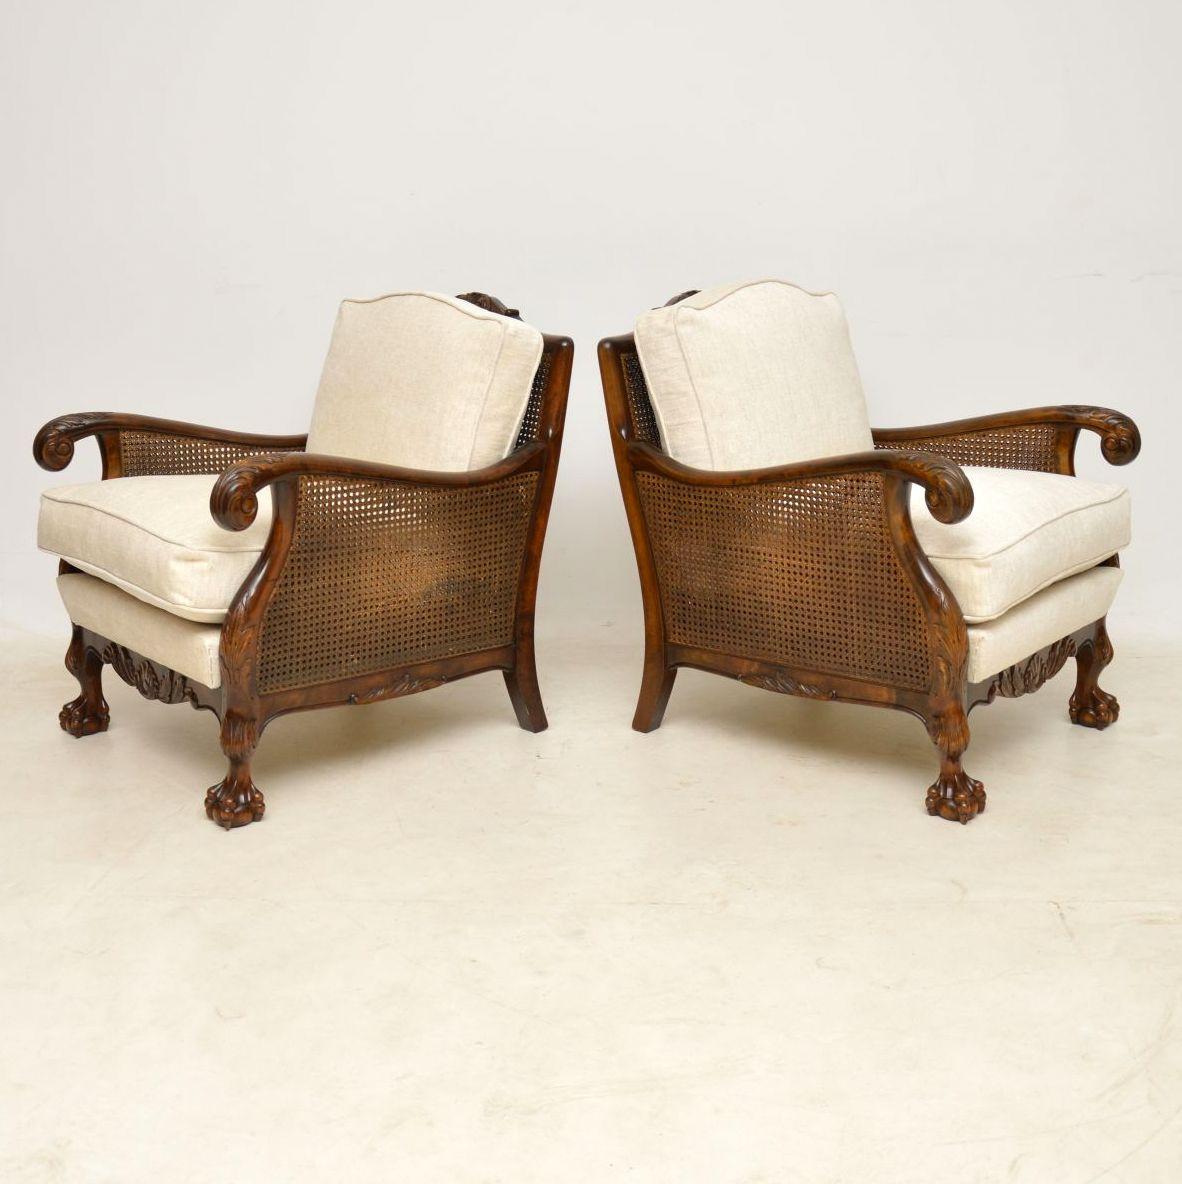 This pair of antique Swedish bergère armchairs are not only great looking, but very comfortable too, because we have re-upholstered them using brand new feather cushions. The frames are satin birch, with that wonderful light and dark grain, plus